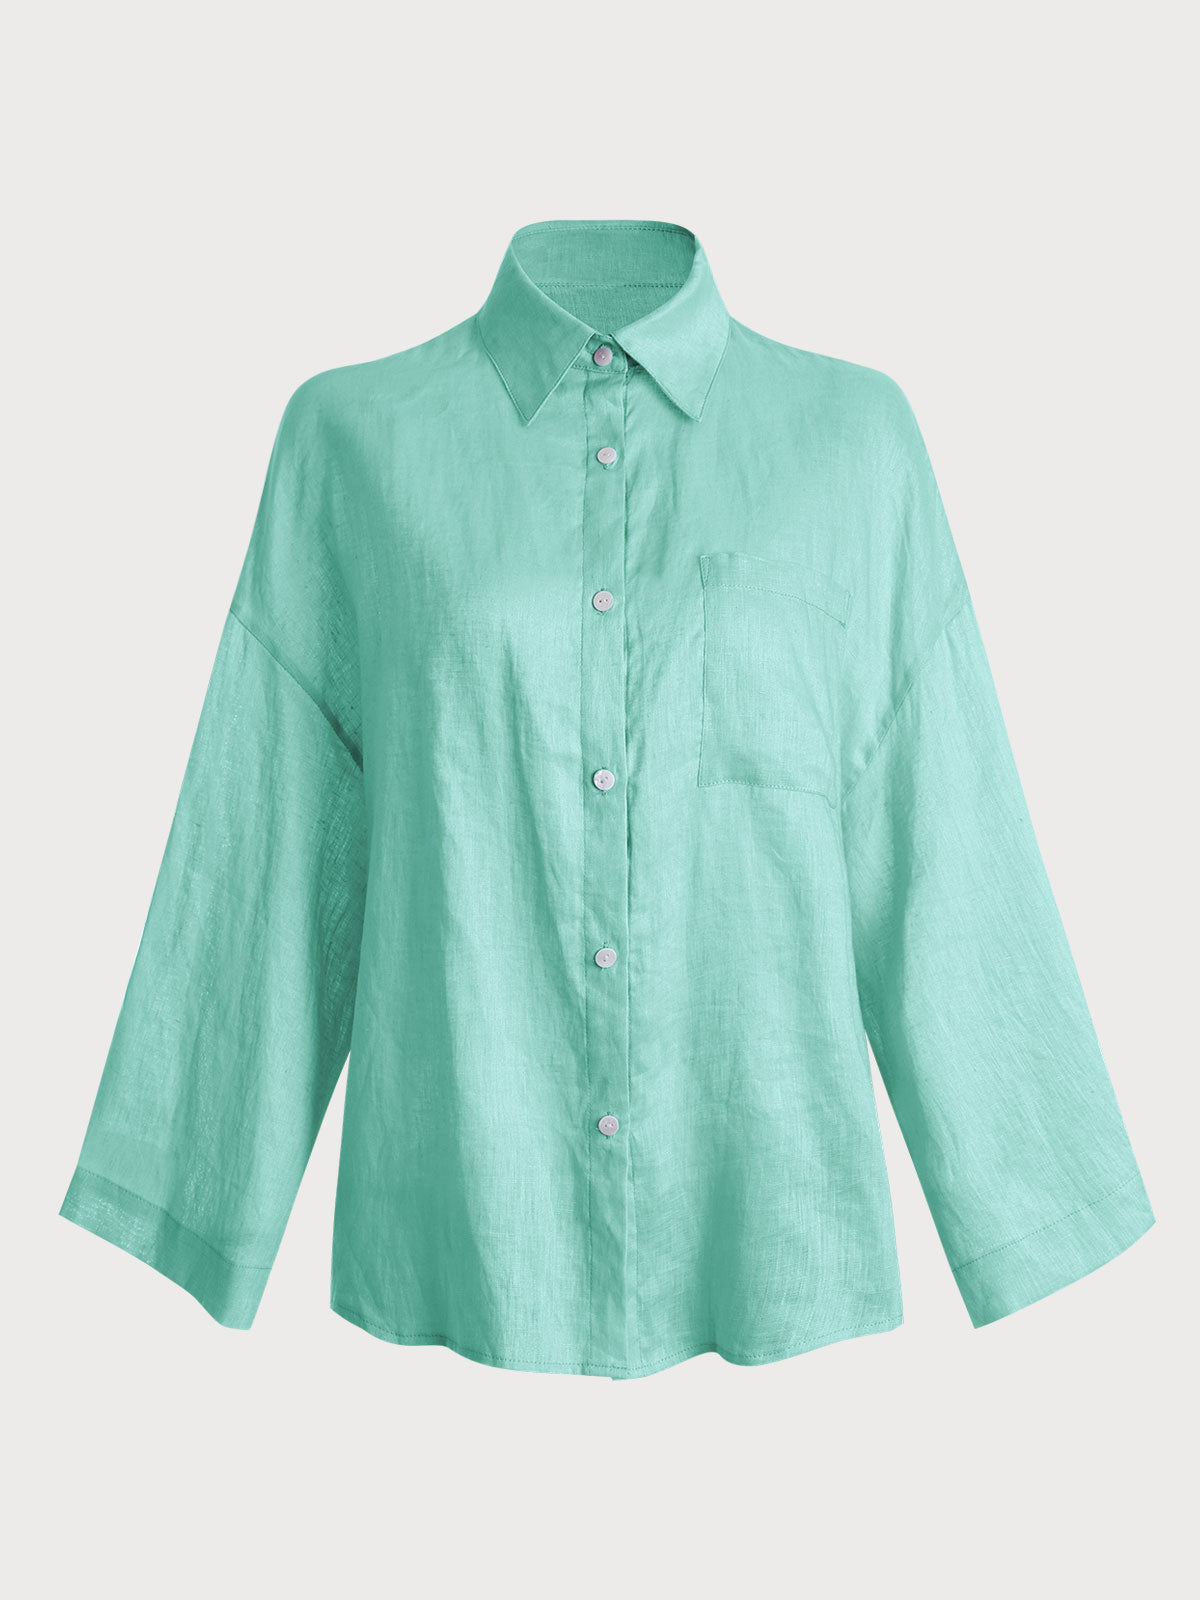 Solid Pocket Flax Shirt & Reviews - Cyan - Sustainable Cover-ups